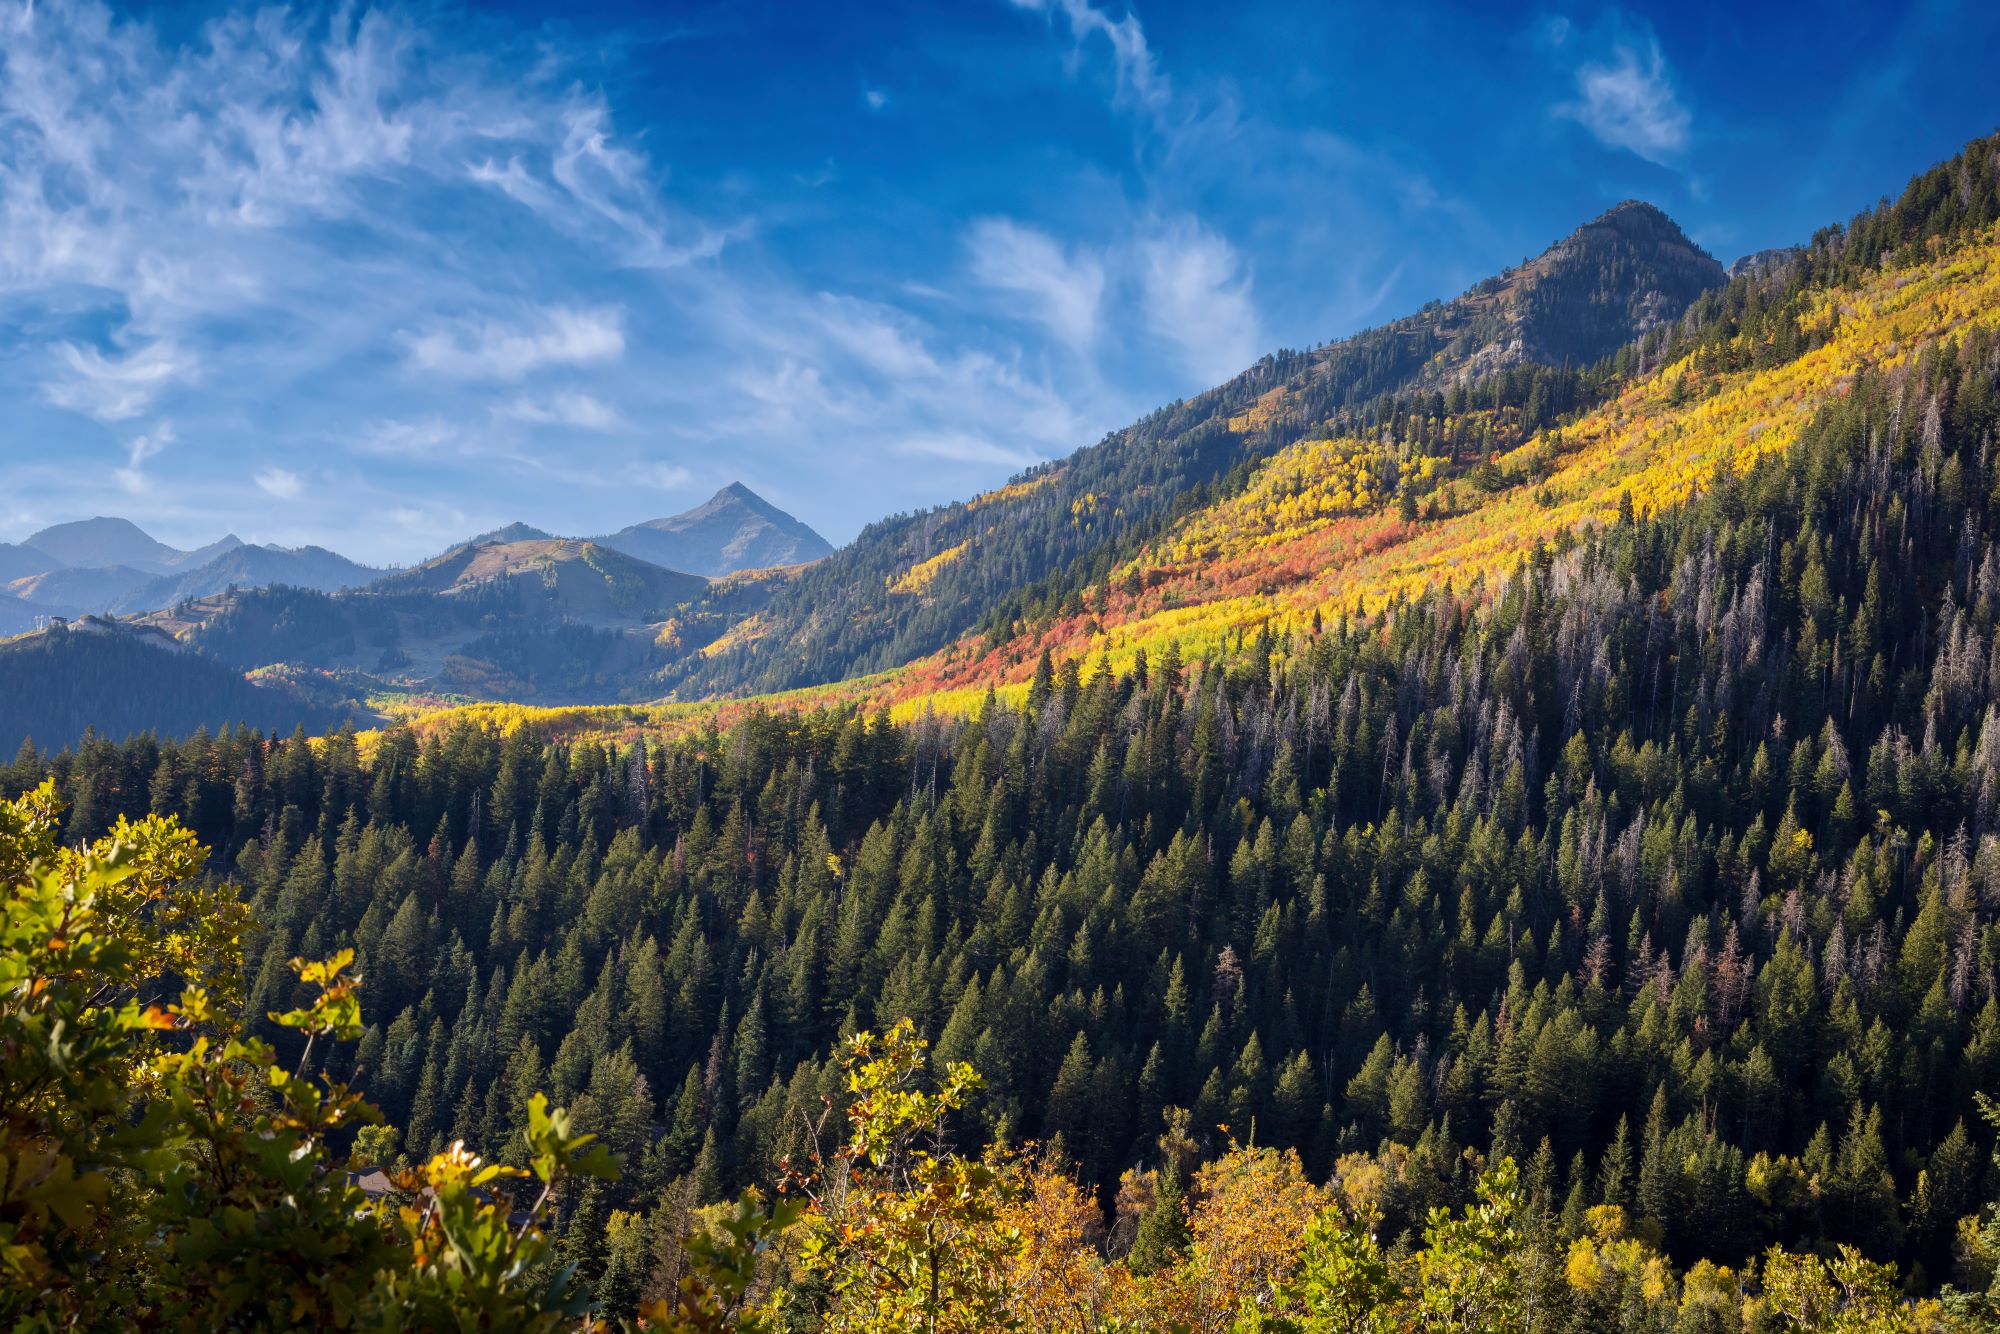 Vibrant autumn colors in Utah's Wasatch mountains.